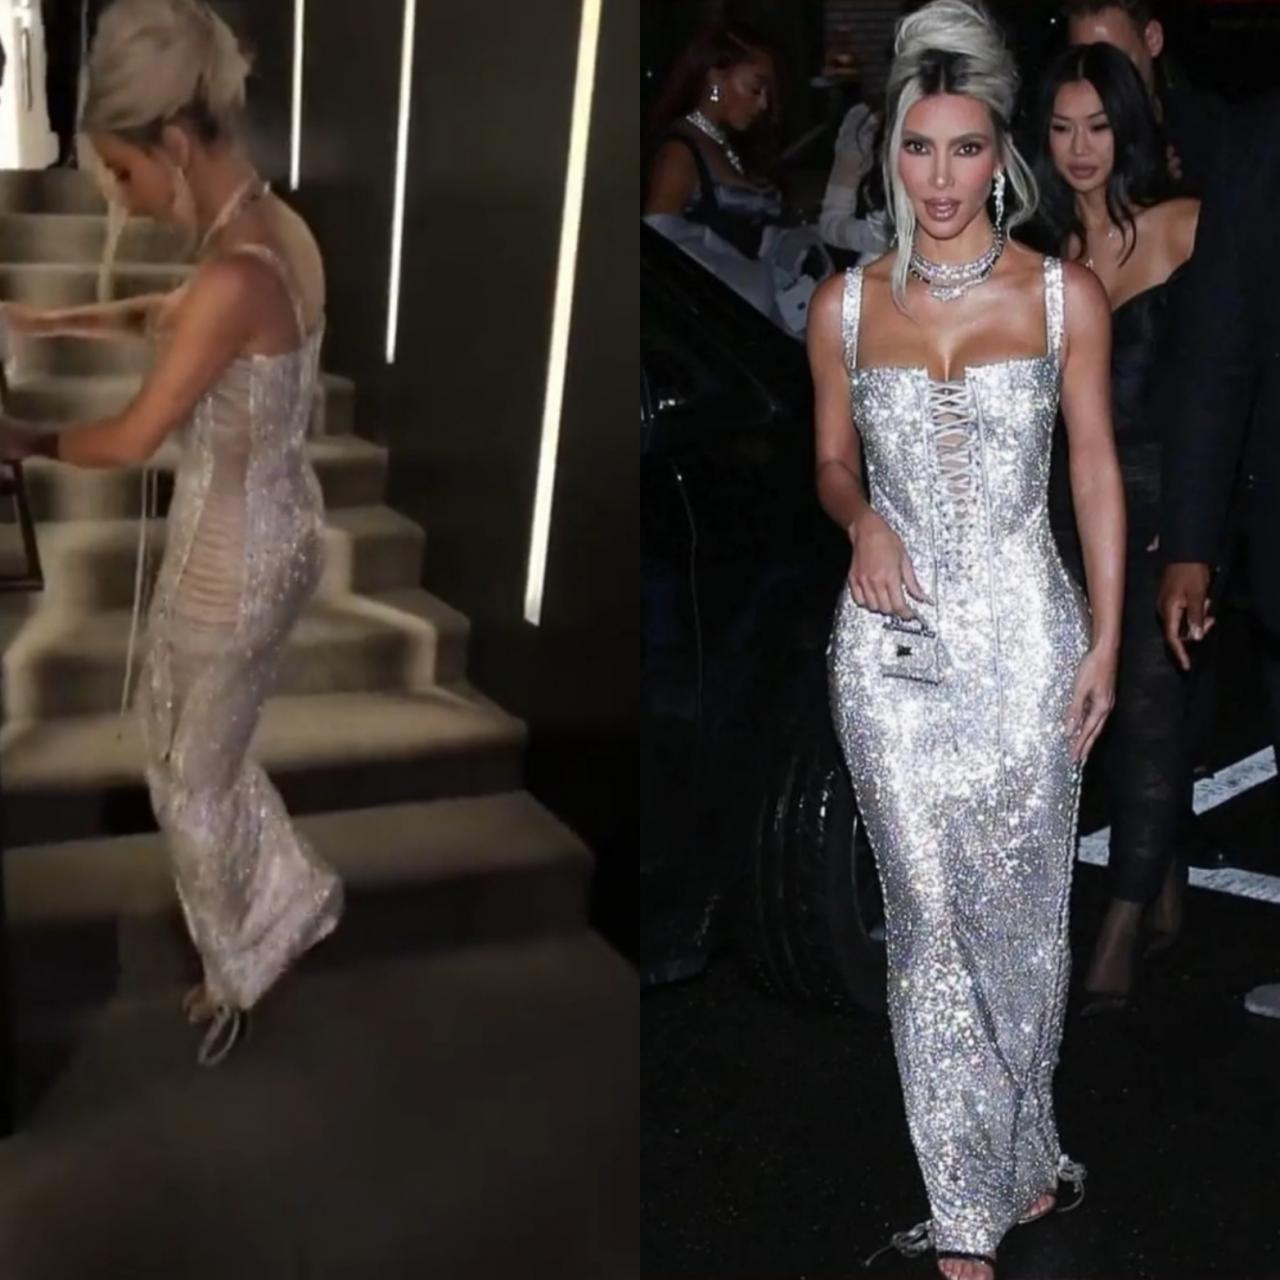 Kim Kardashian struggles to walk in tight dress as she attends Dolce and Gabbana after party (video)